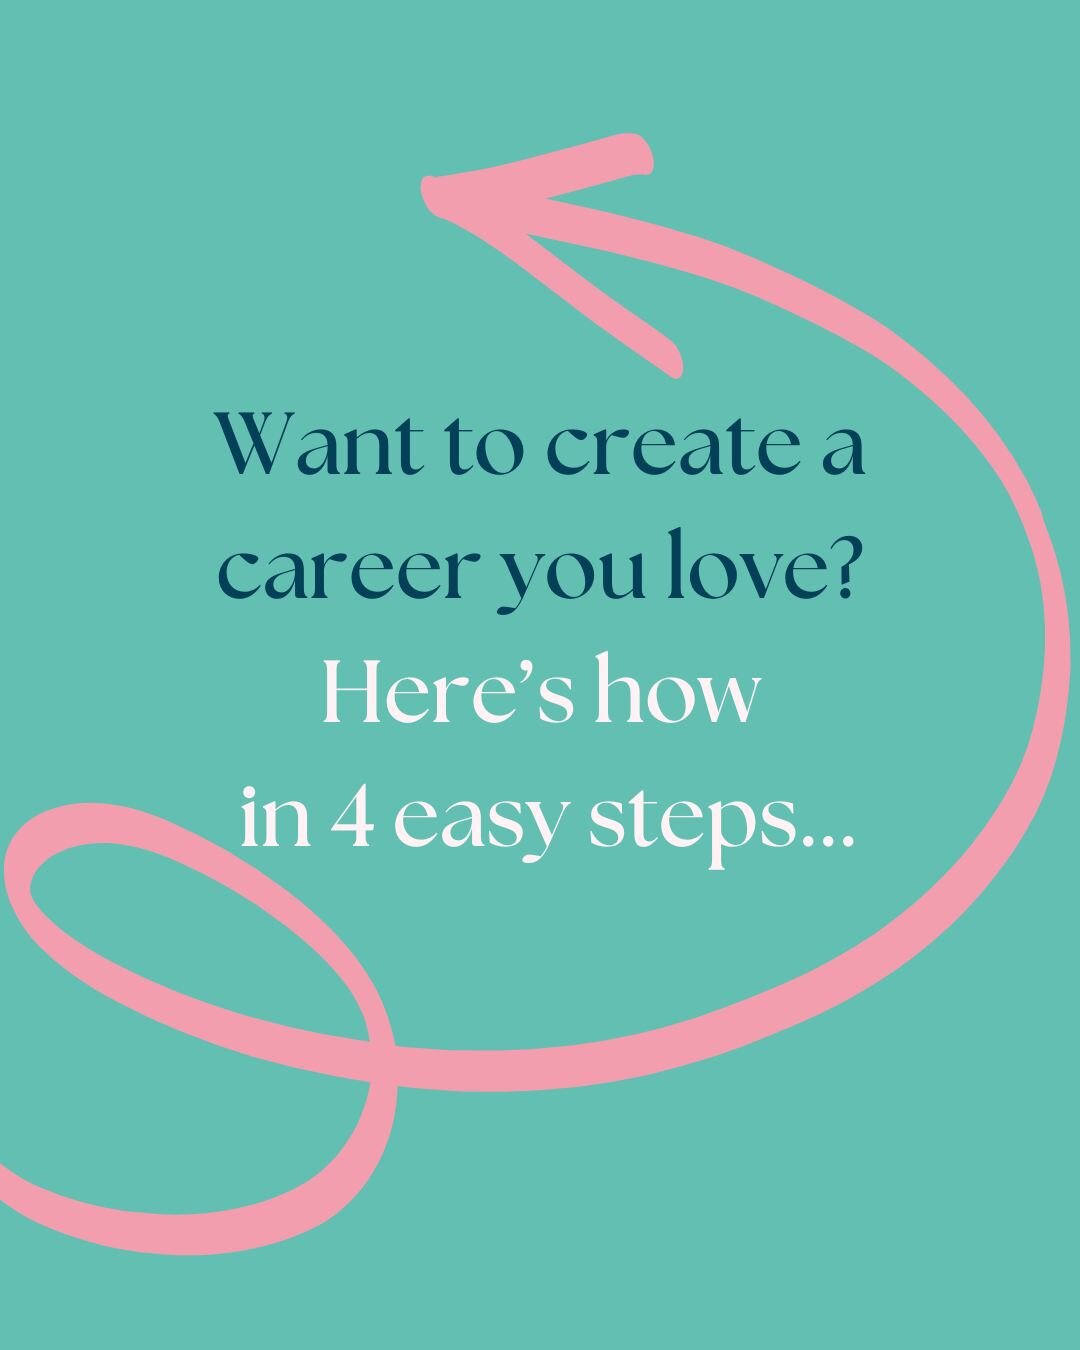 If you're dissatisfied and unfulfilled in your work life and you're thinking of making a change, but have no idea where to start, then this month's blog is for you.

We share with you the 4 steps you need to take to create a career (and life) you lov